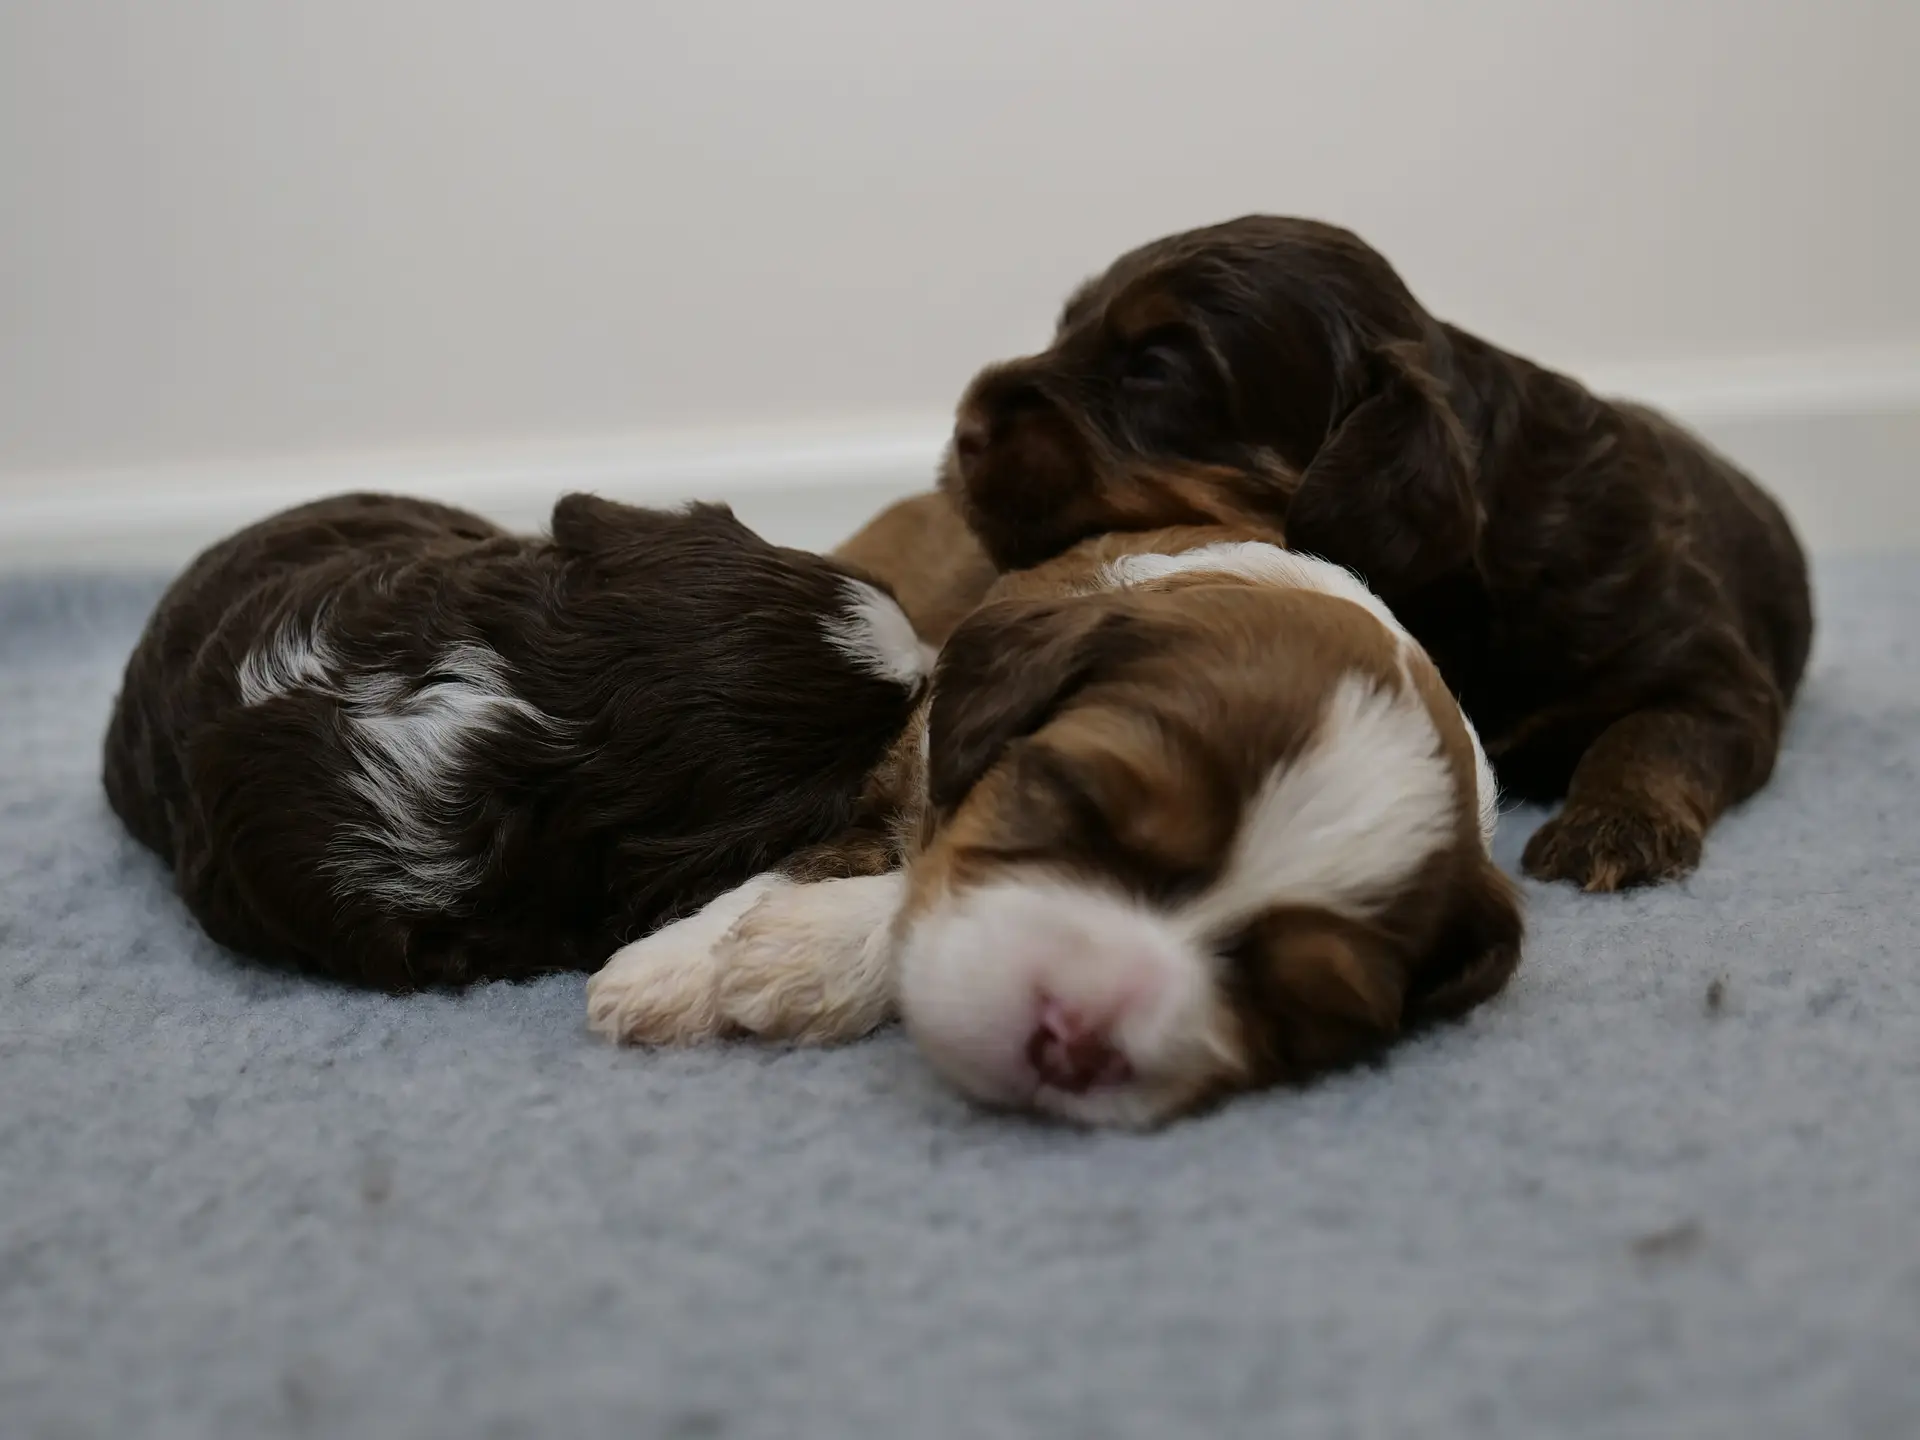 Three 1-week old chocolate phantom labradoodle puppies lying together. The middle puppy is a reddish brown and white, she is lying on her side. On the right is a dark chocolate phantom who is resting his head on the middle puppys back. On the left, a dark chocolate puppy with white on her neck, is curled in a ball with her head against the middle puppys stomach.